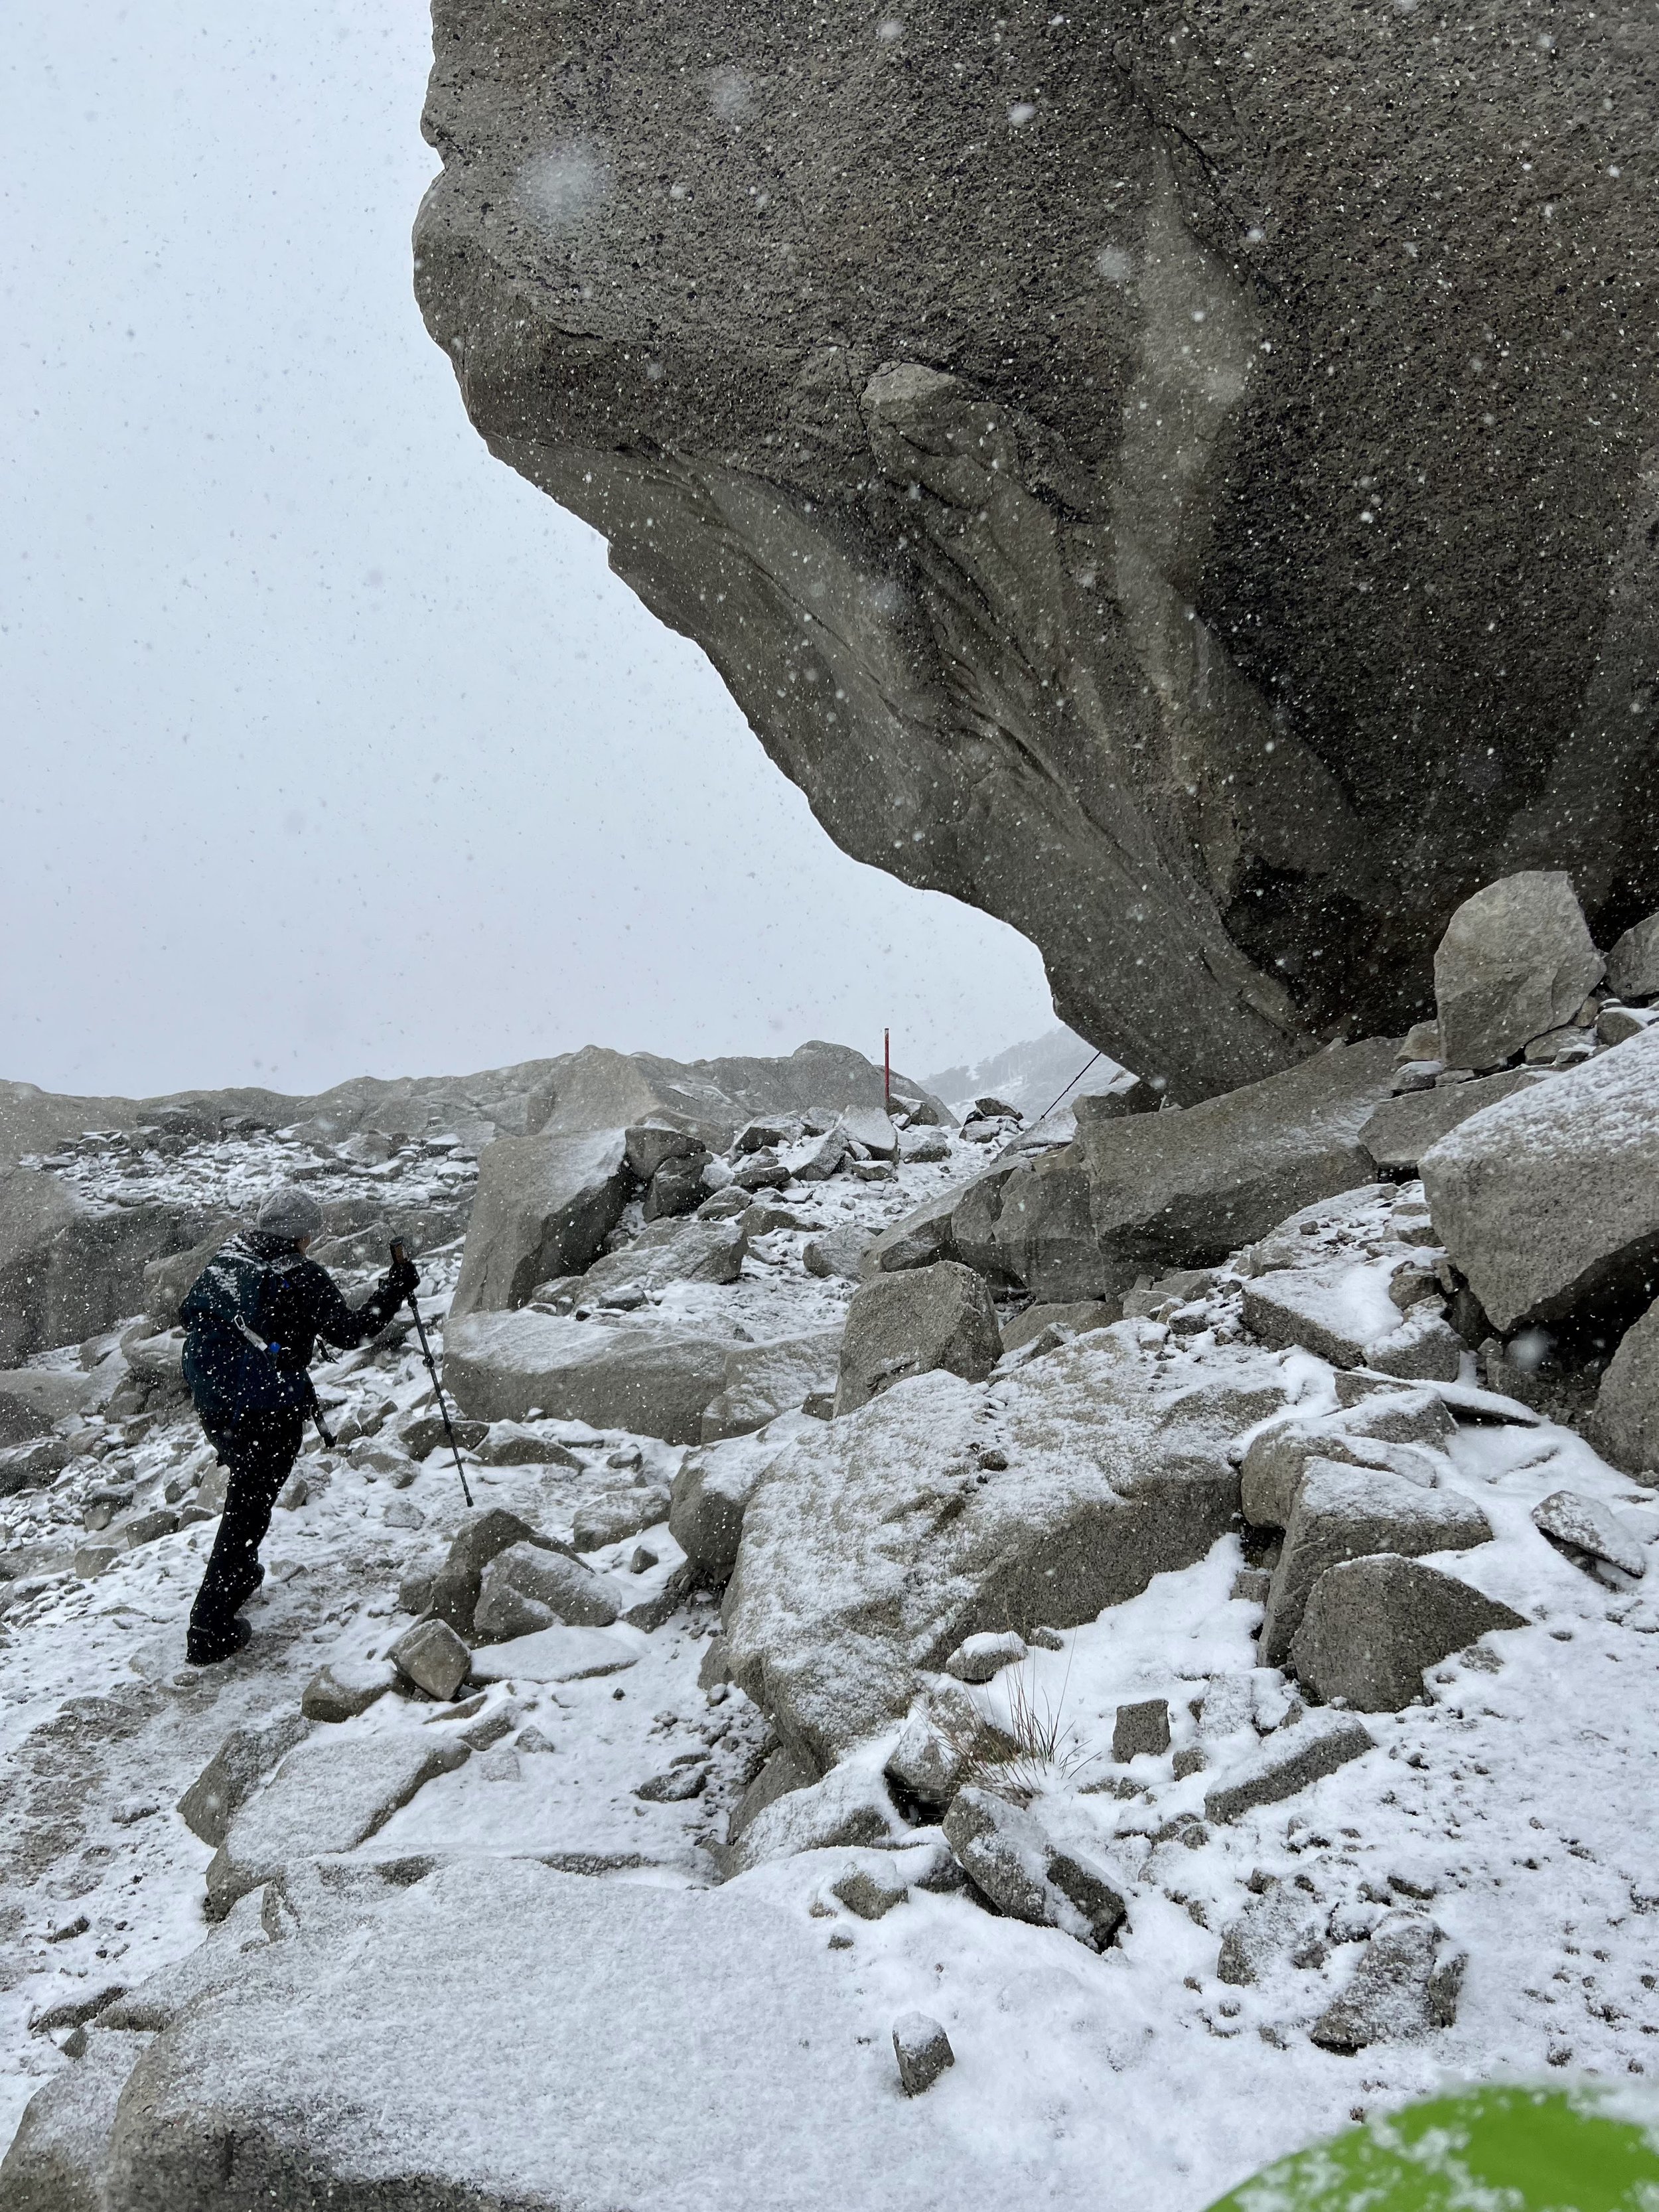 Snow and boulders